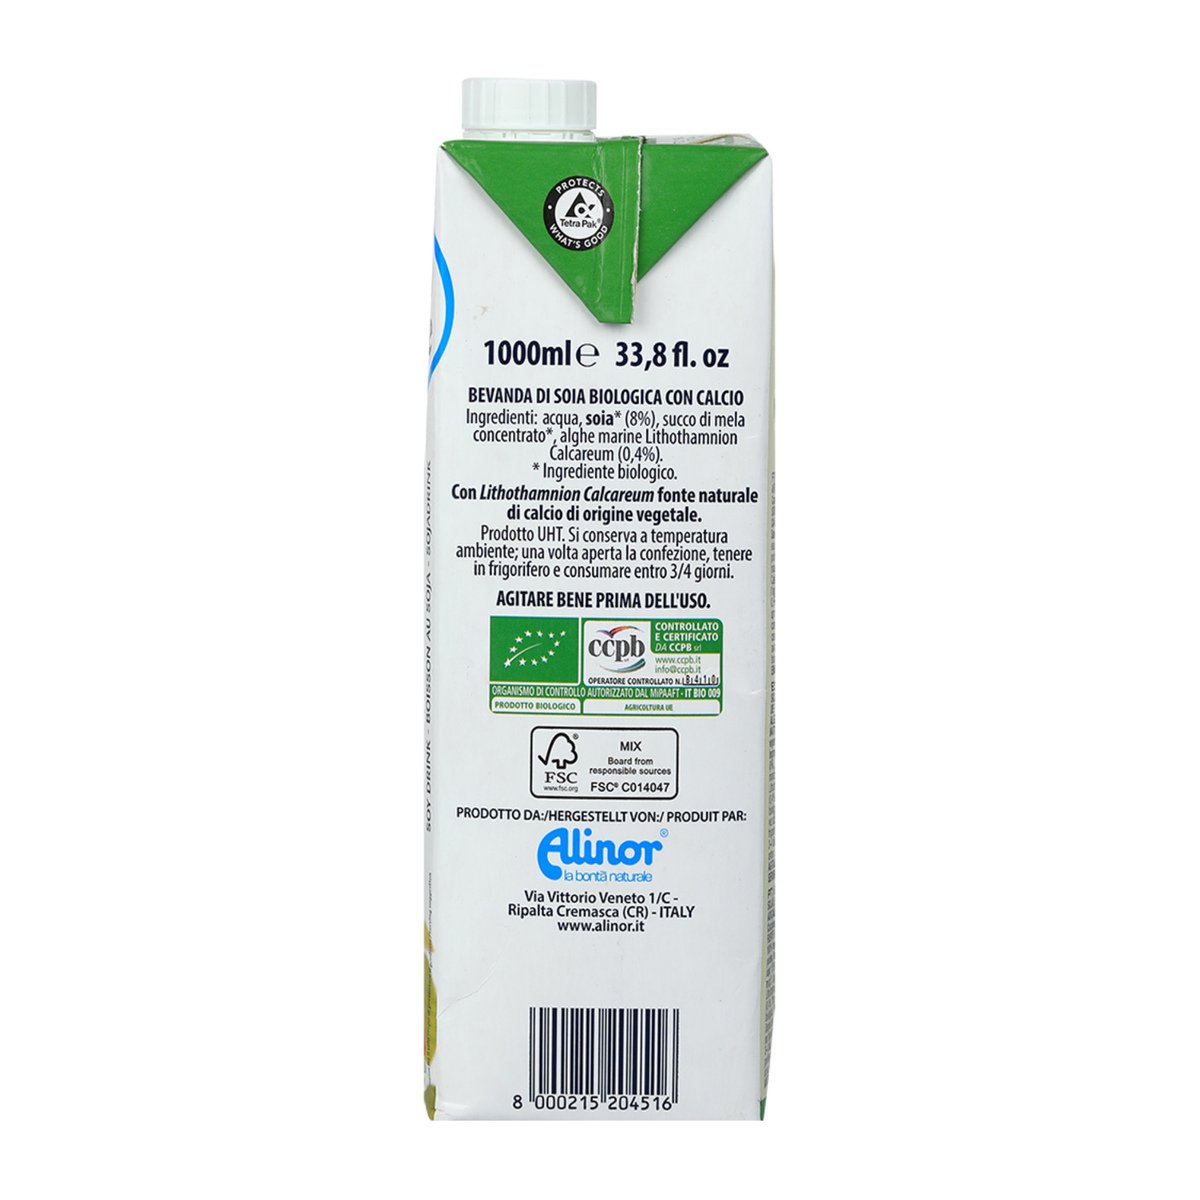 Ecolife Organic Soy Drink Calcium 1Litre